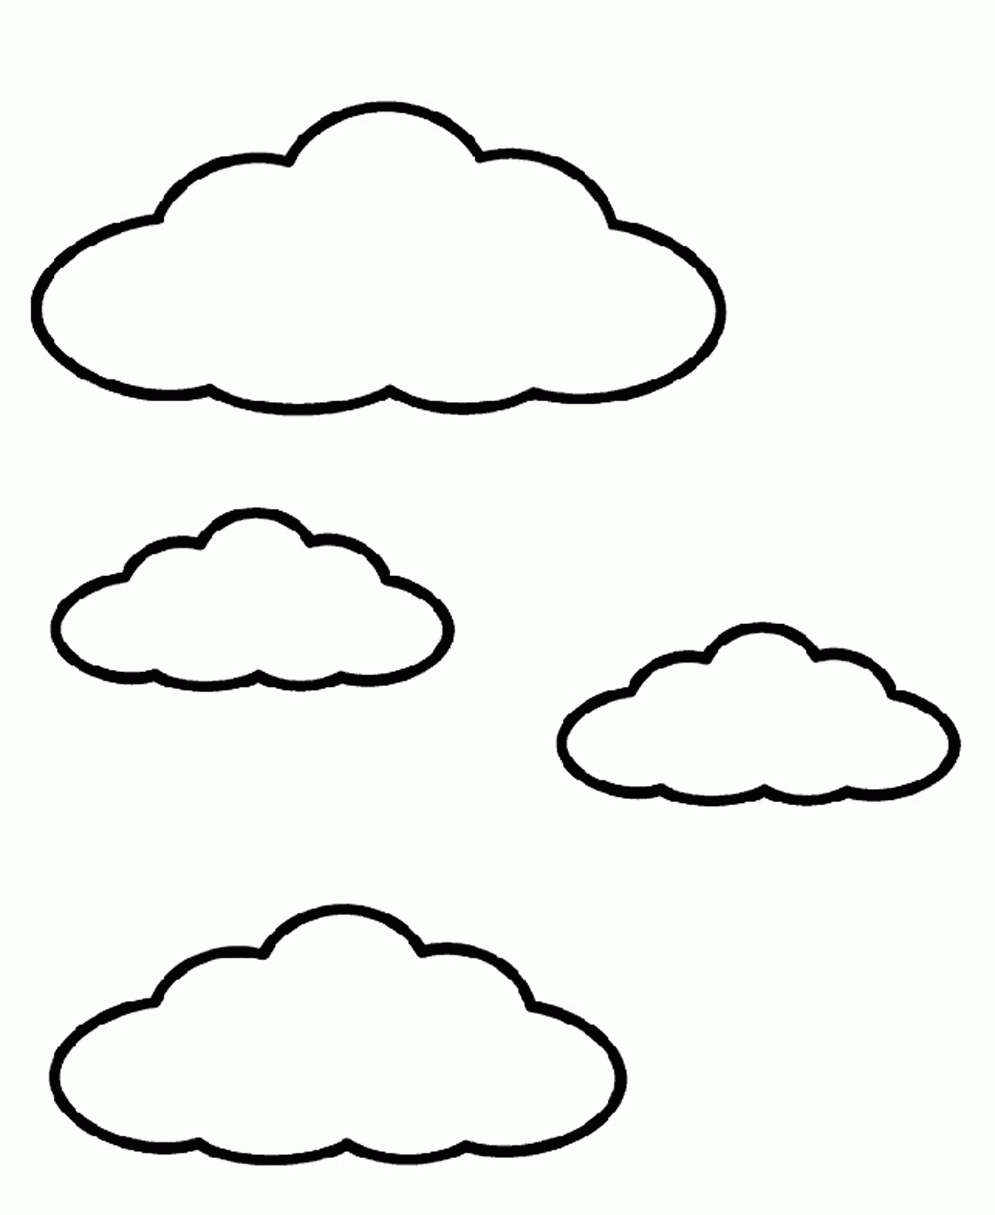 Clouds Coloring Pages For Kids - Coloring Home